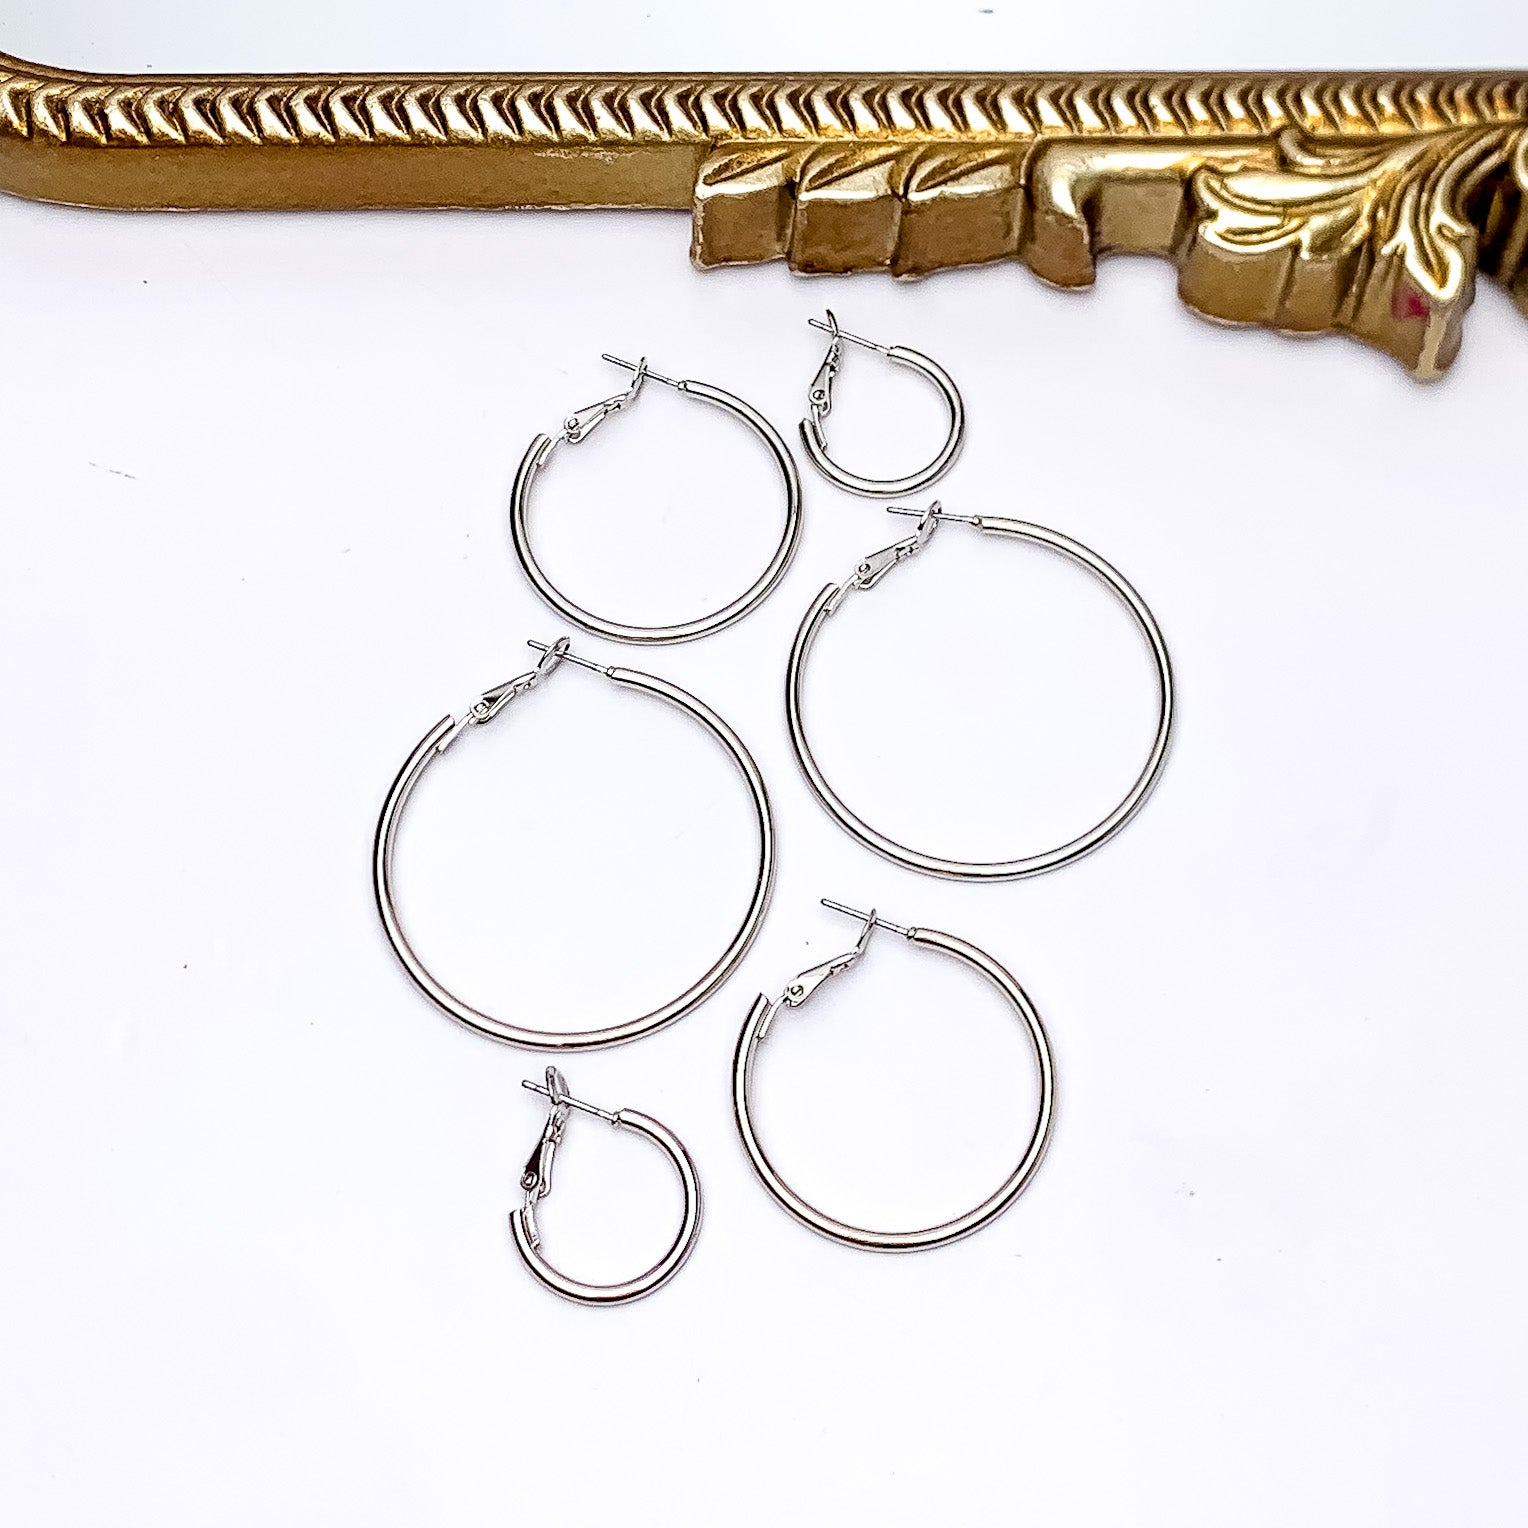 Set Of Three | Hoop Earrings in Silver Tone. Pictured on a white background with a gold frame above the earrings. There are three different sizes of earrings all in the picture.